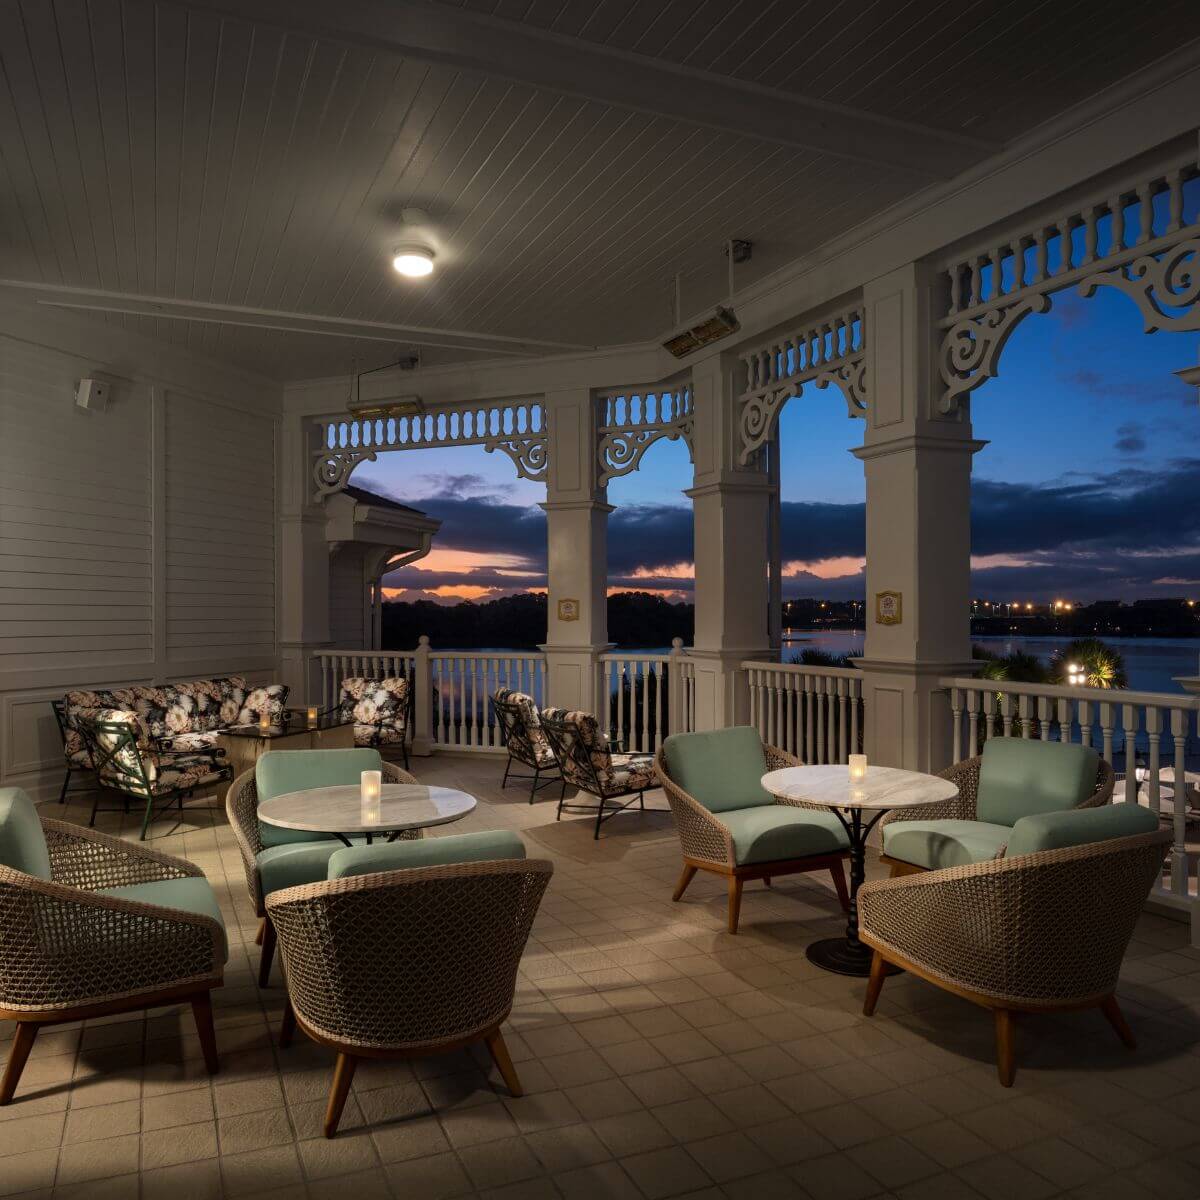 Photo of the Enchanted Rose Lounge balcony during sunset at the Grand Floridian Resort & Spa at Disney World.